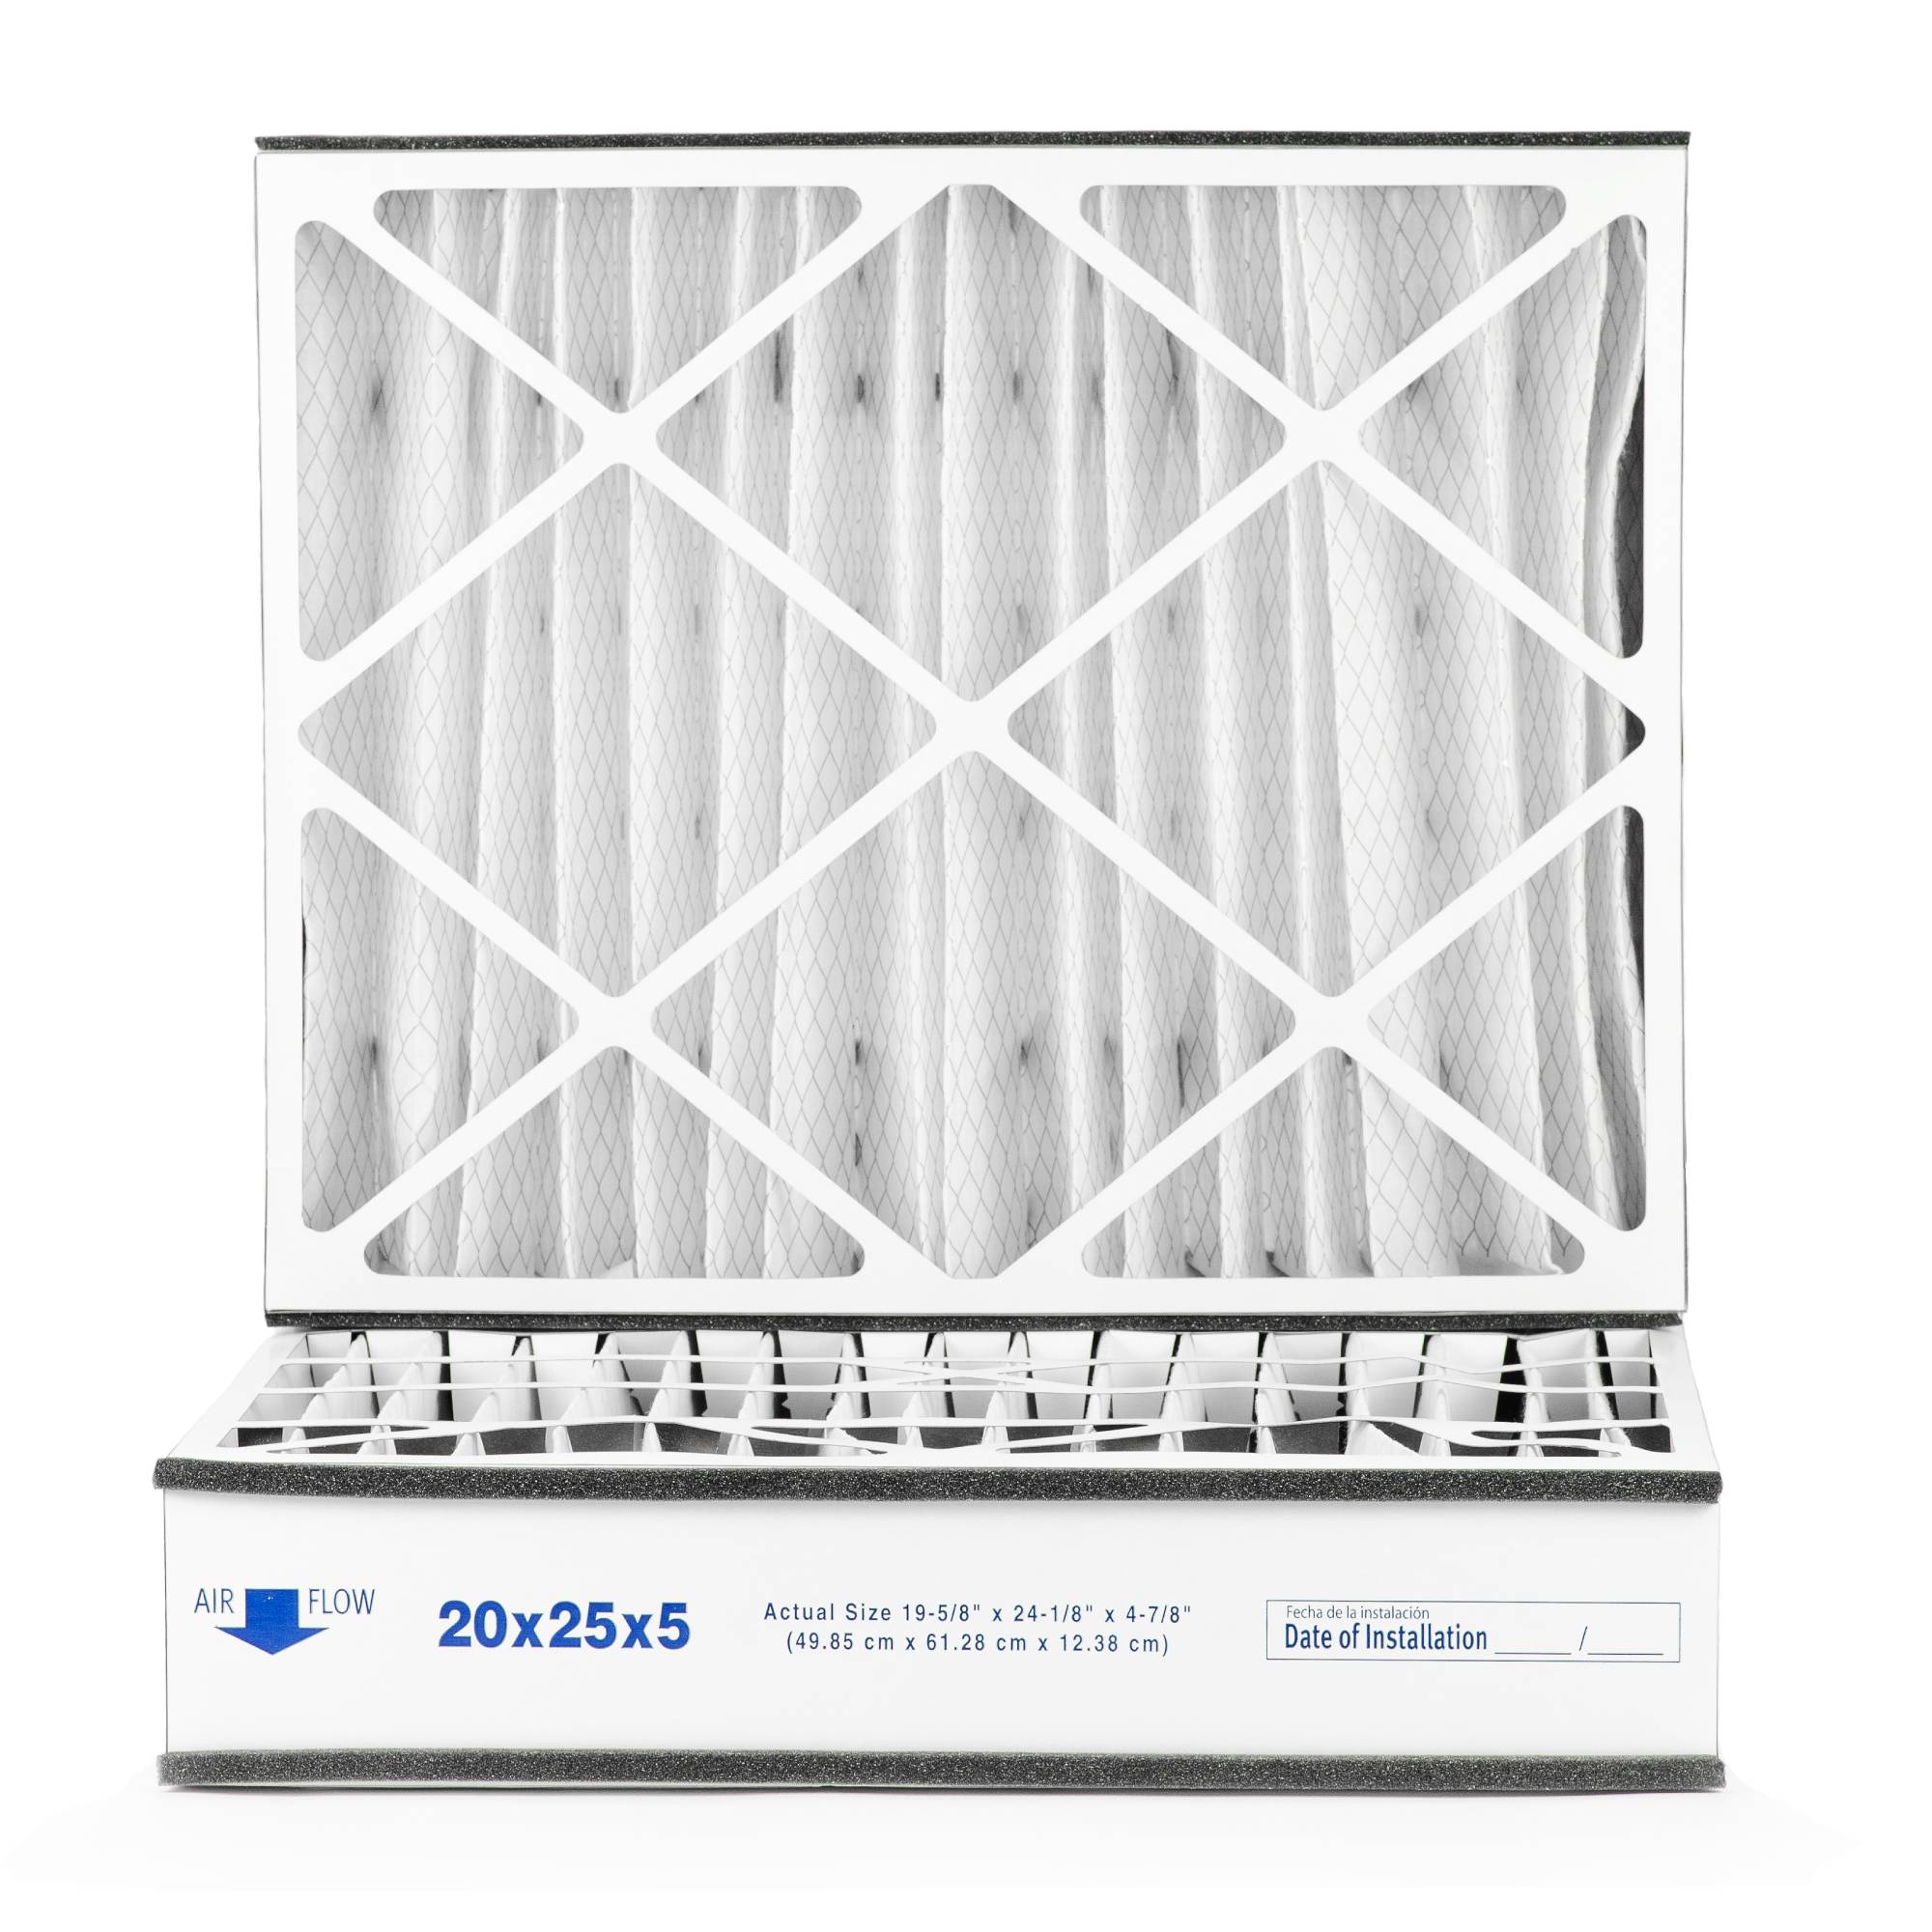 Filters Fast® Replacement for Trion Air Bear 255649-102 20x25x5 MERV 8 Furnace & AC Air Filter - 2-Pack